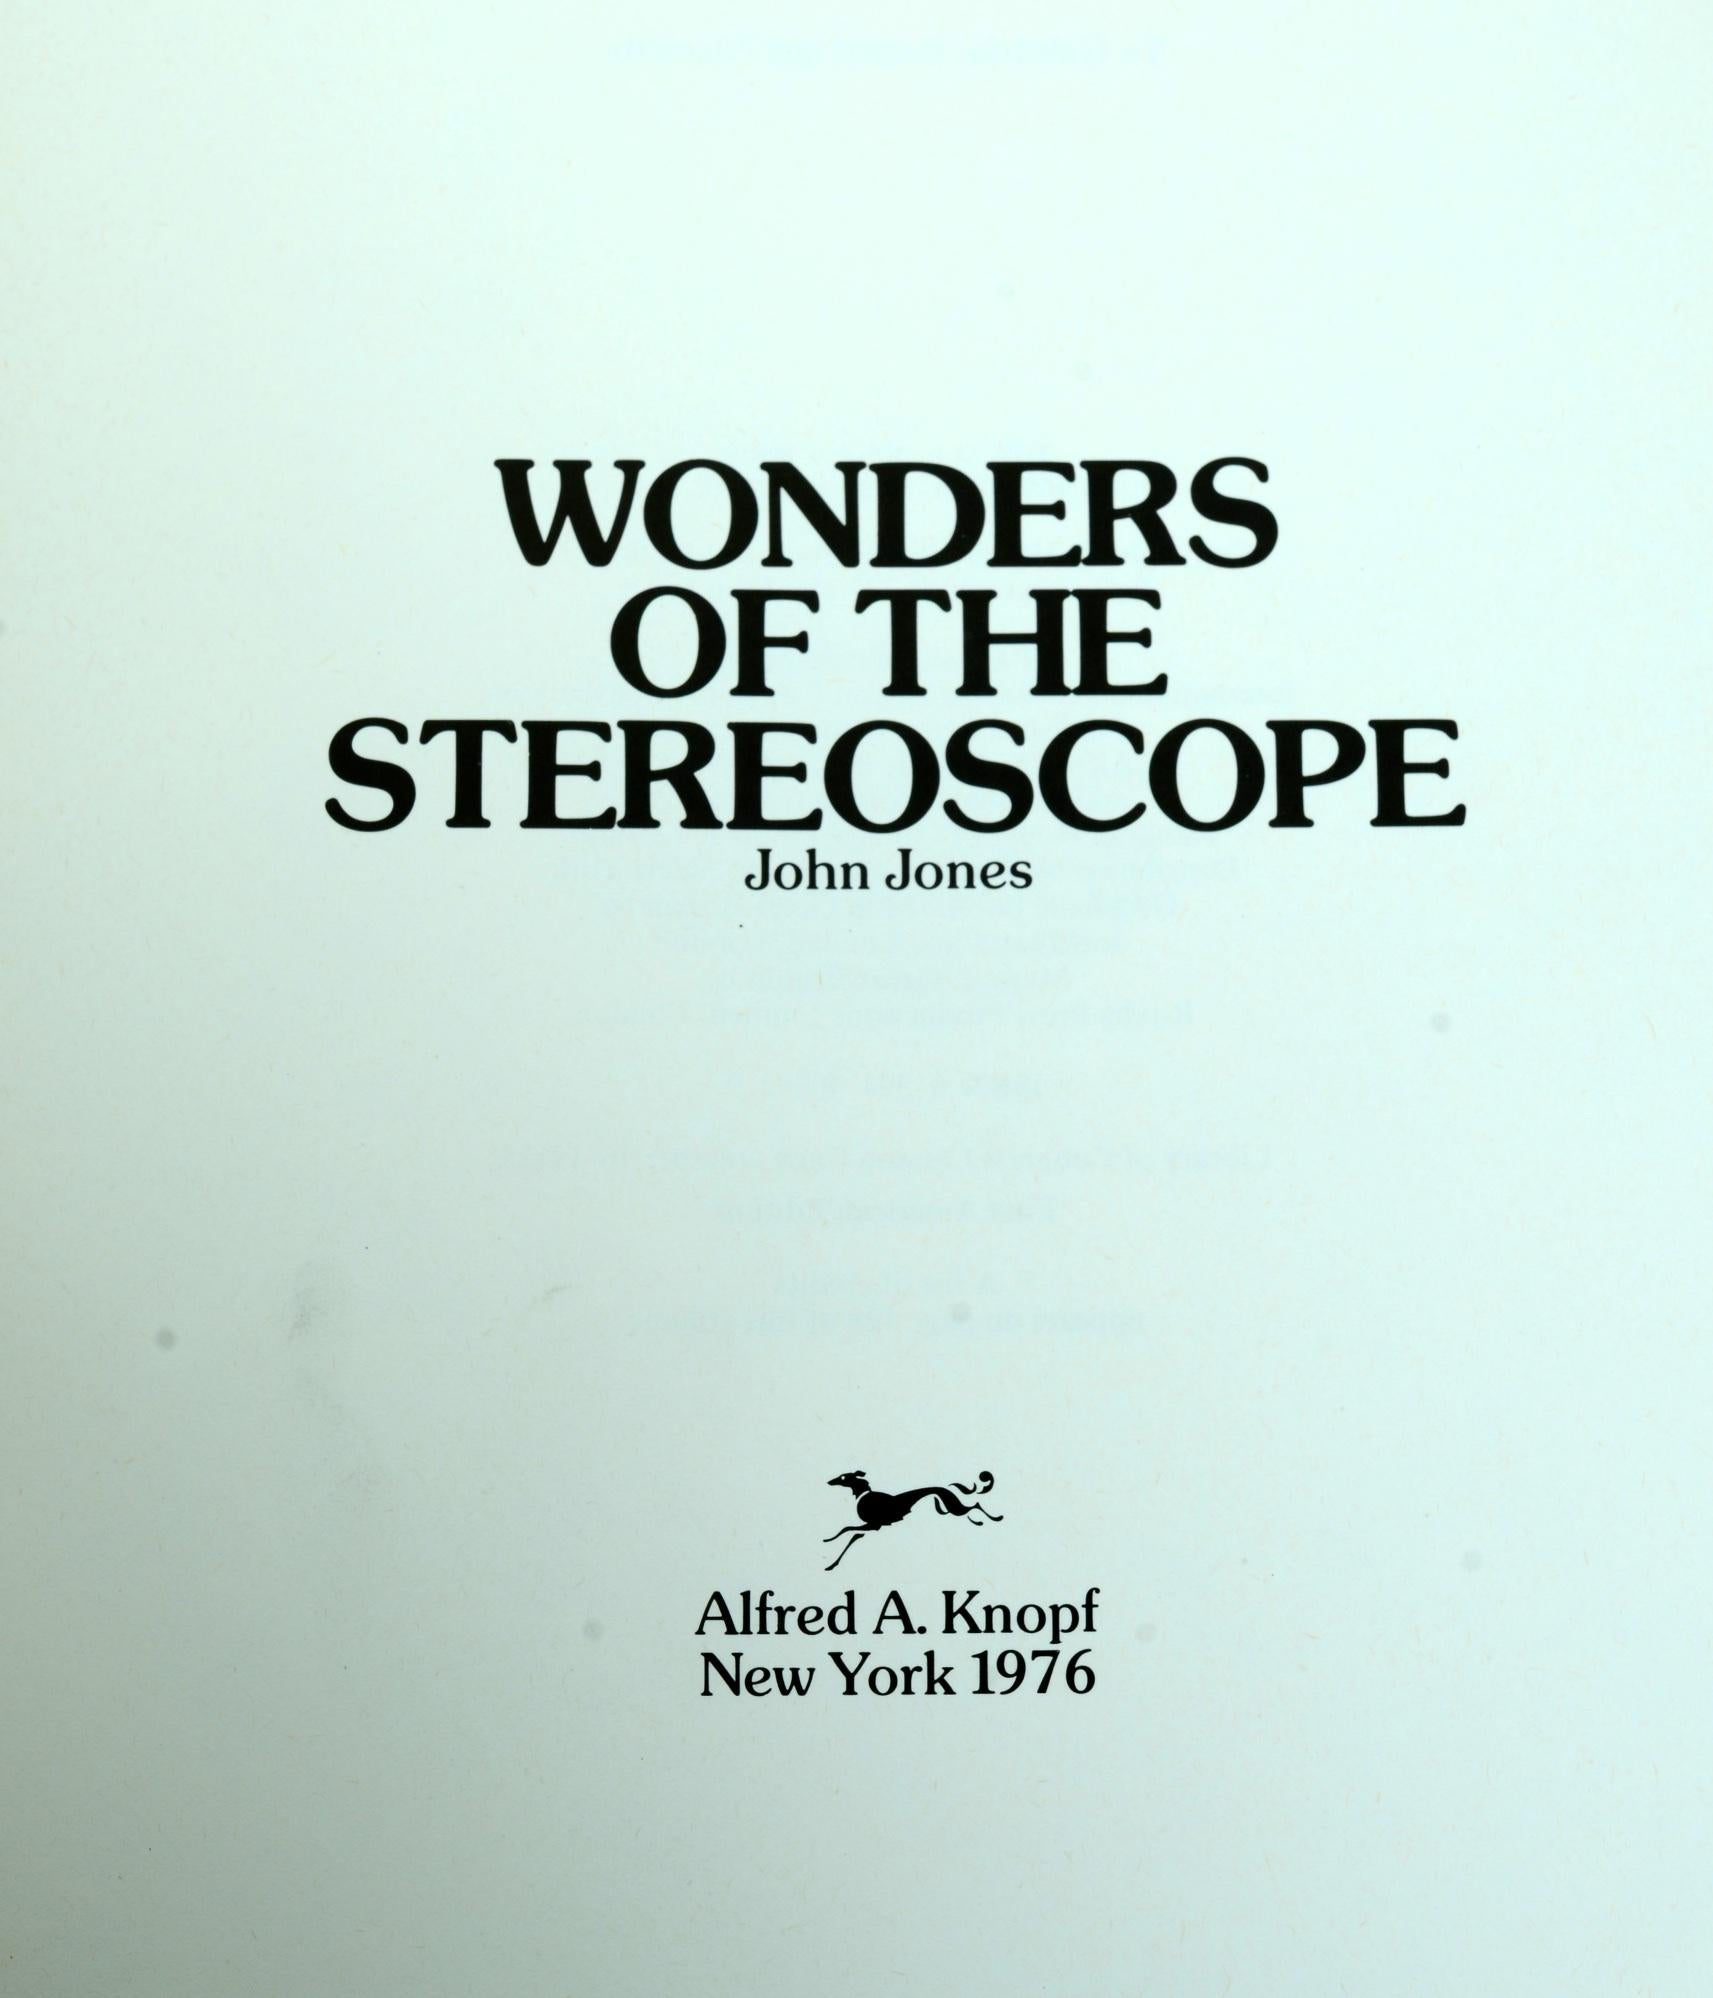 American Wonders of the Stereoscope, by John Jones, 1st Edition For Sale